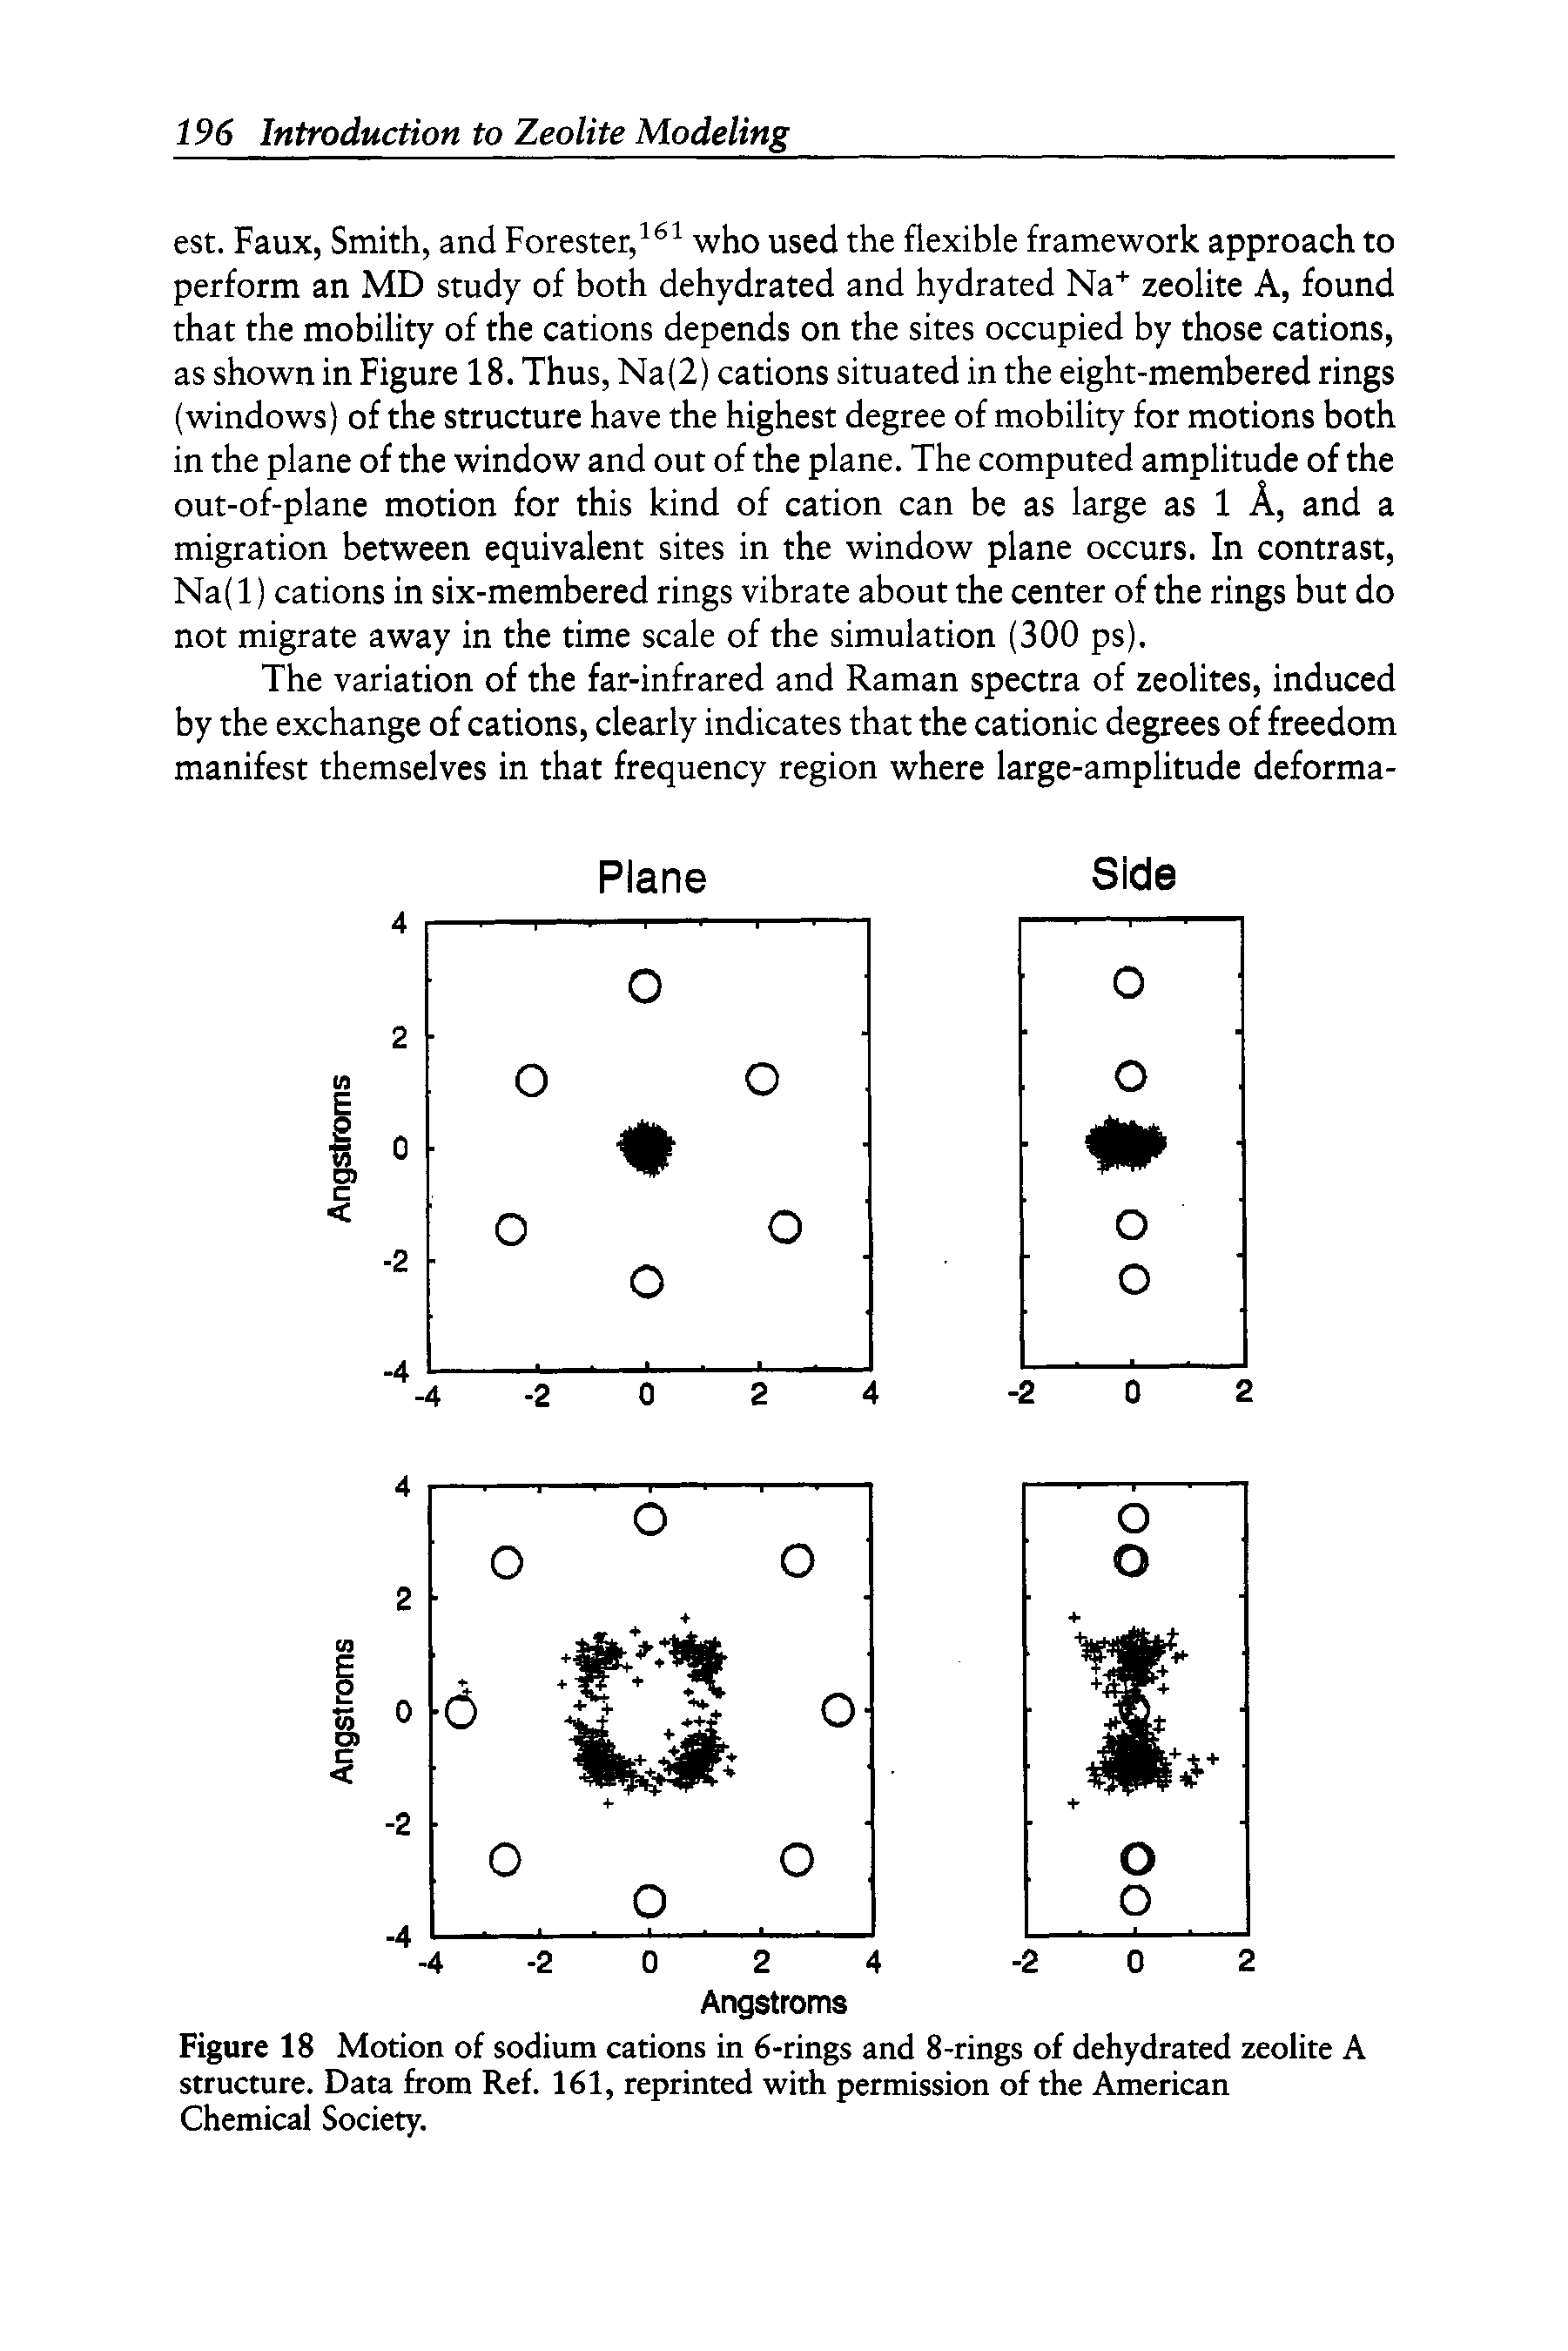 Figure 18 Motion of sodium cations in 6-rings and 8-rings of dehydrated zeolite A structure. Data from Ref. 161, reprinted with permission of the American Chemical Society.